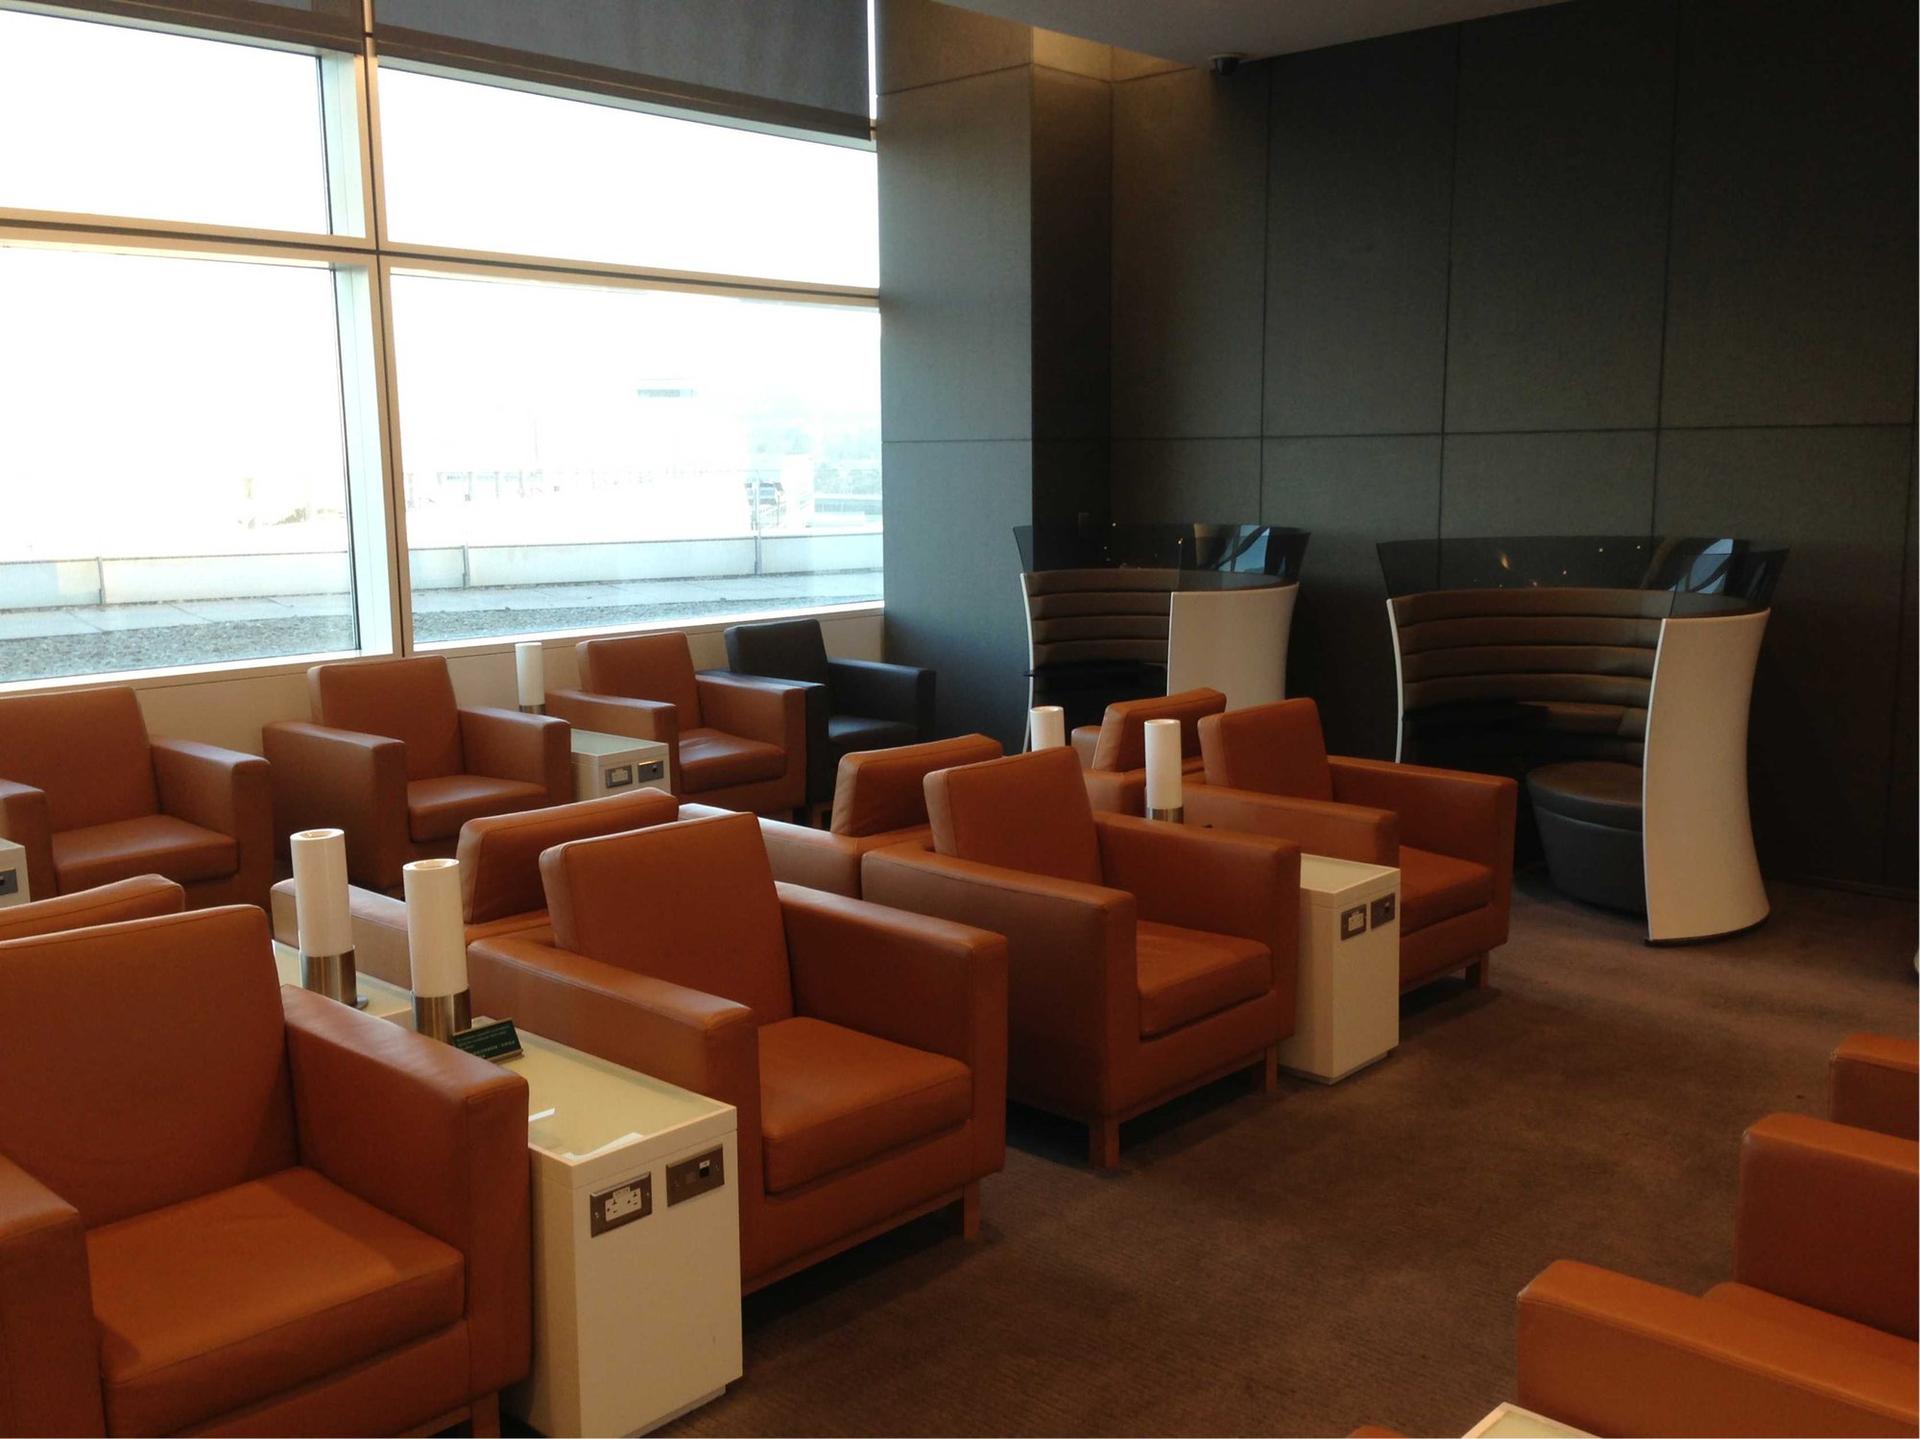 Cathay Pacific First and Business Class Lounge image 7 of 74